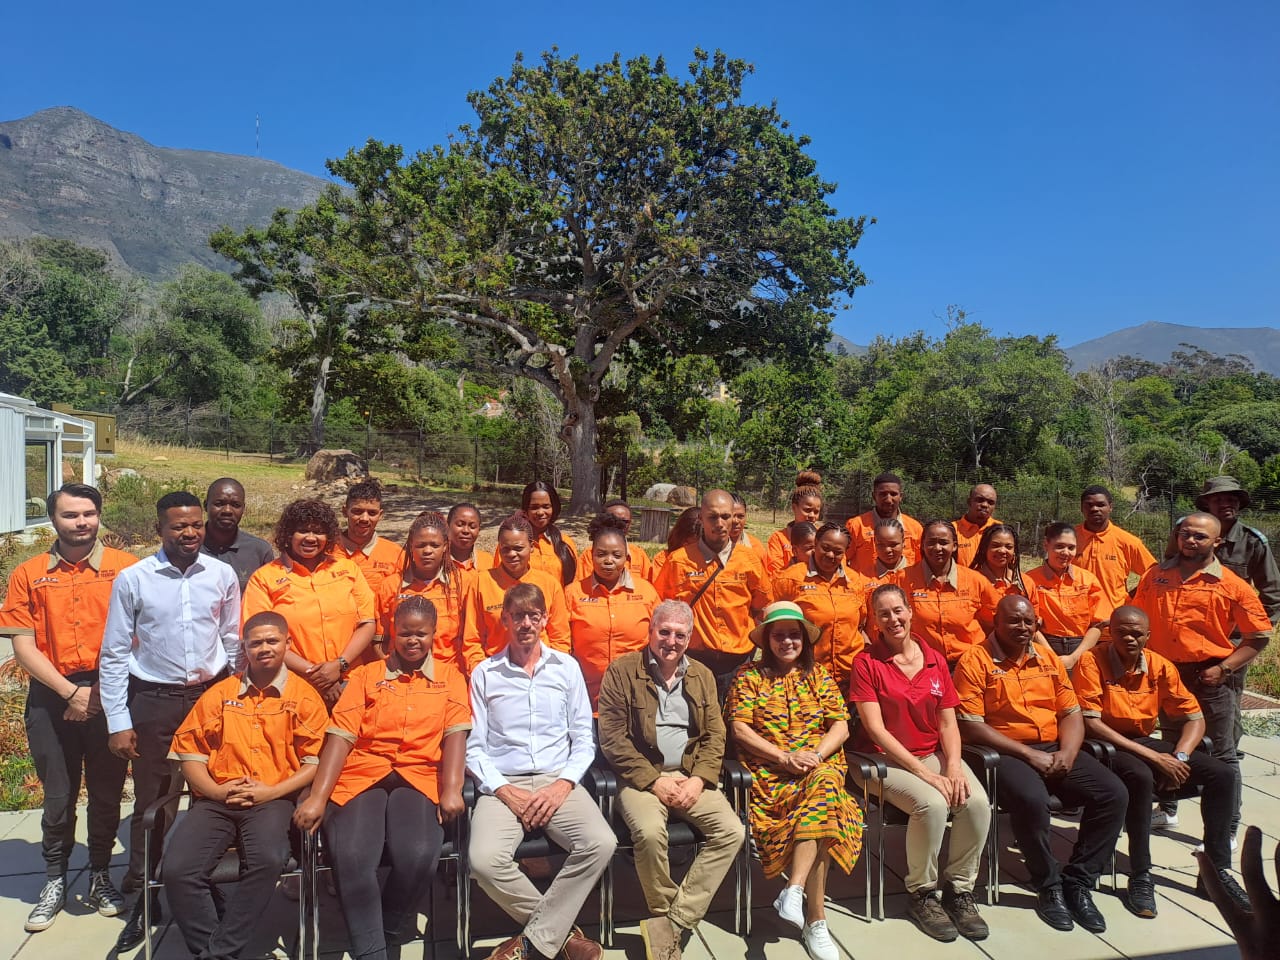 Minister de Lille welcomes tourism monitors for Table Mountain National Park